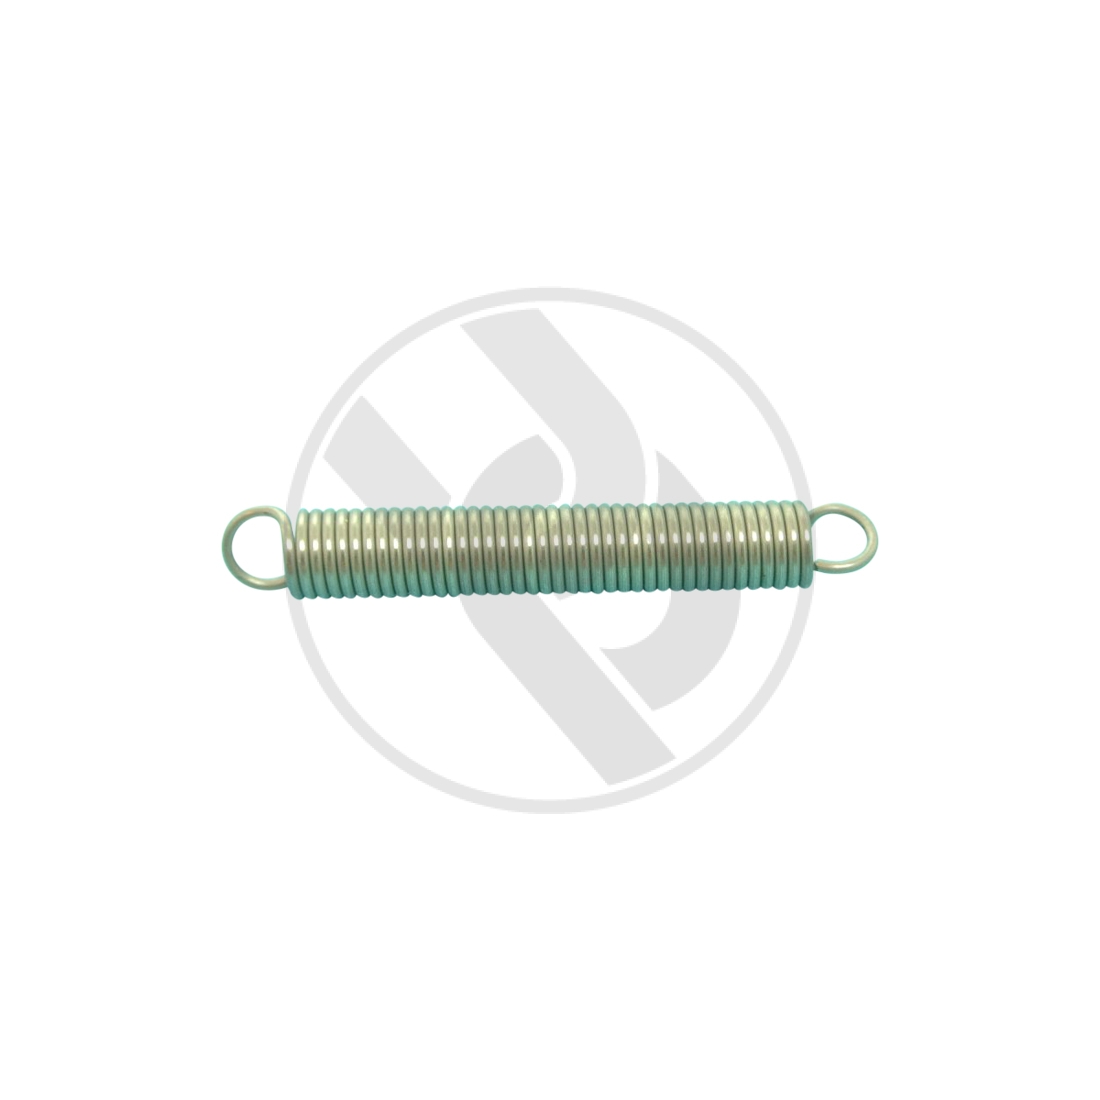 Tension spring, for Newtec